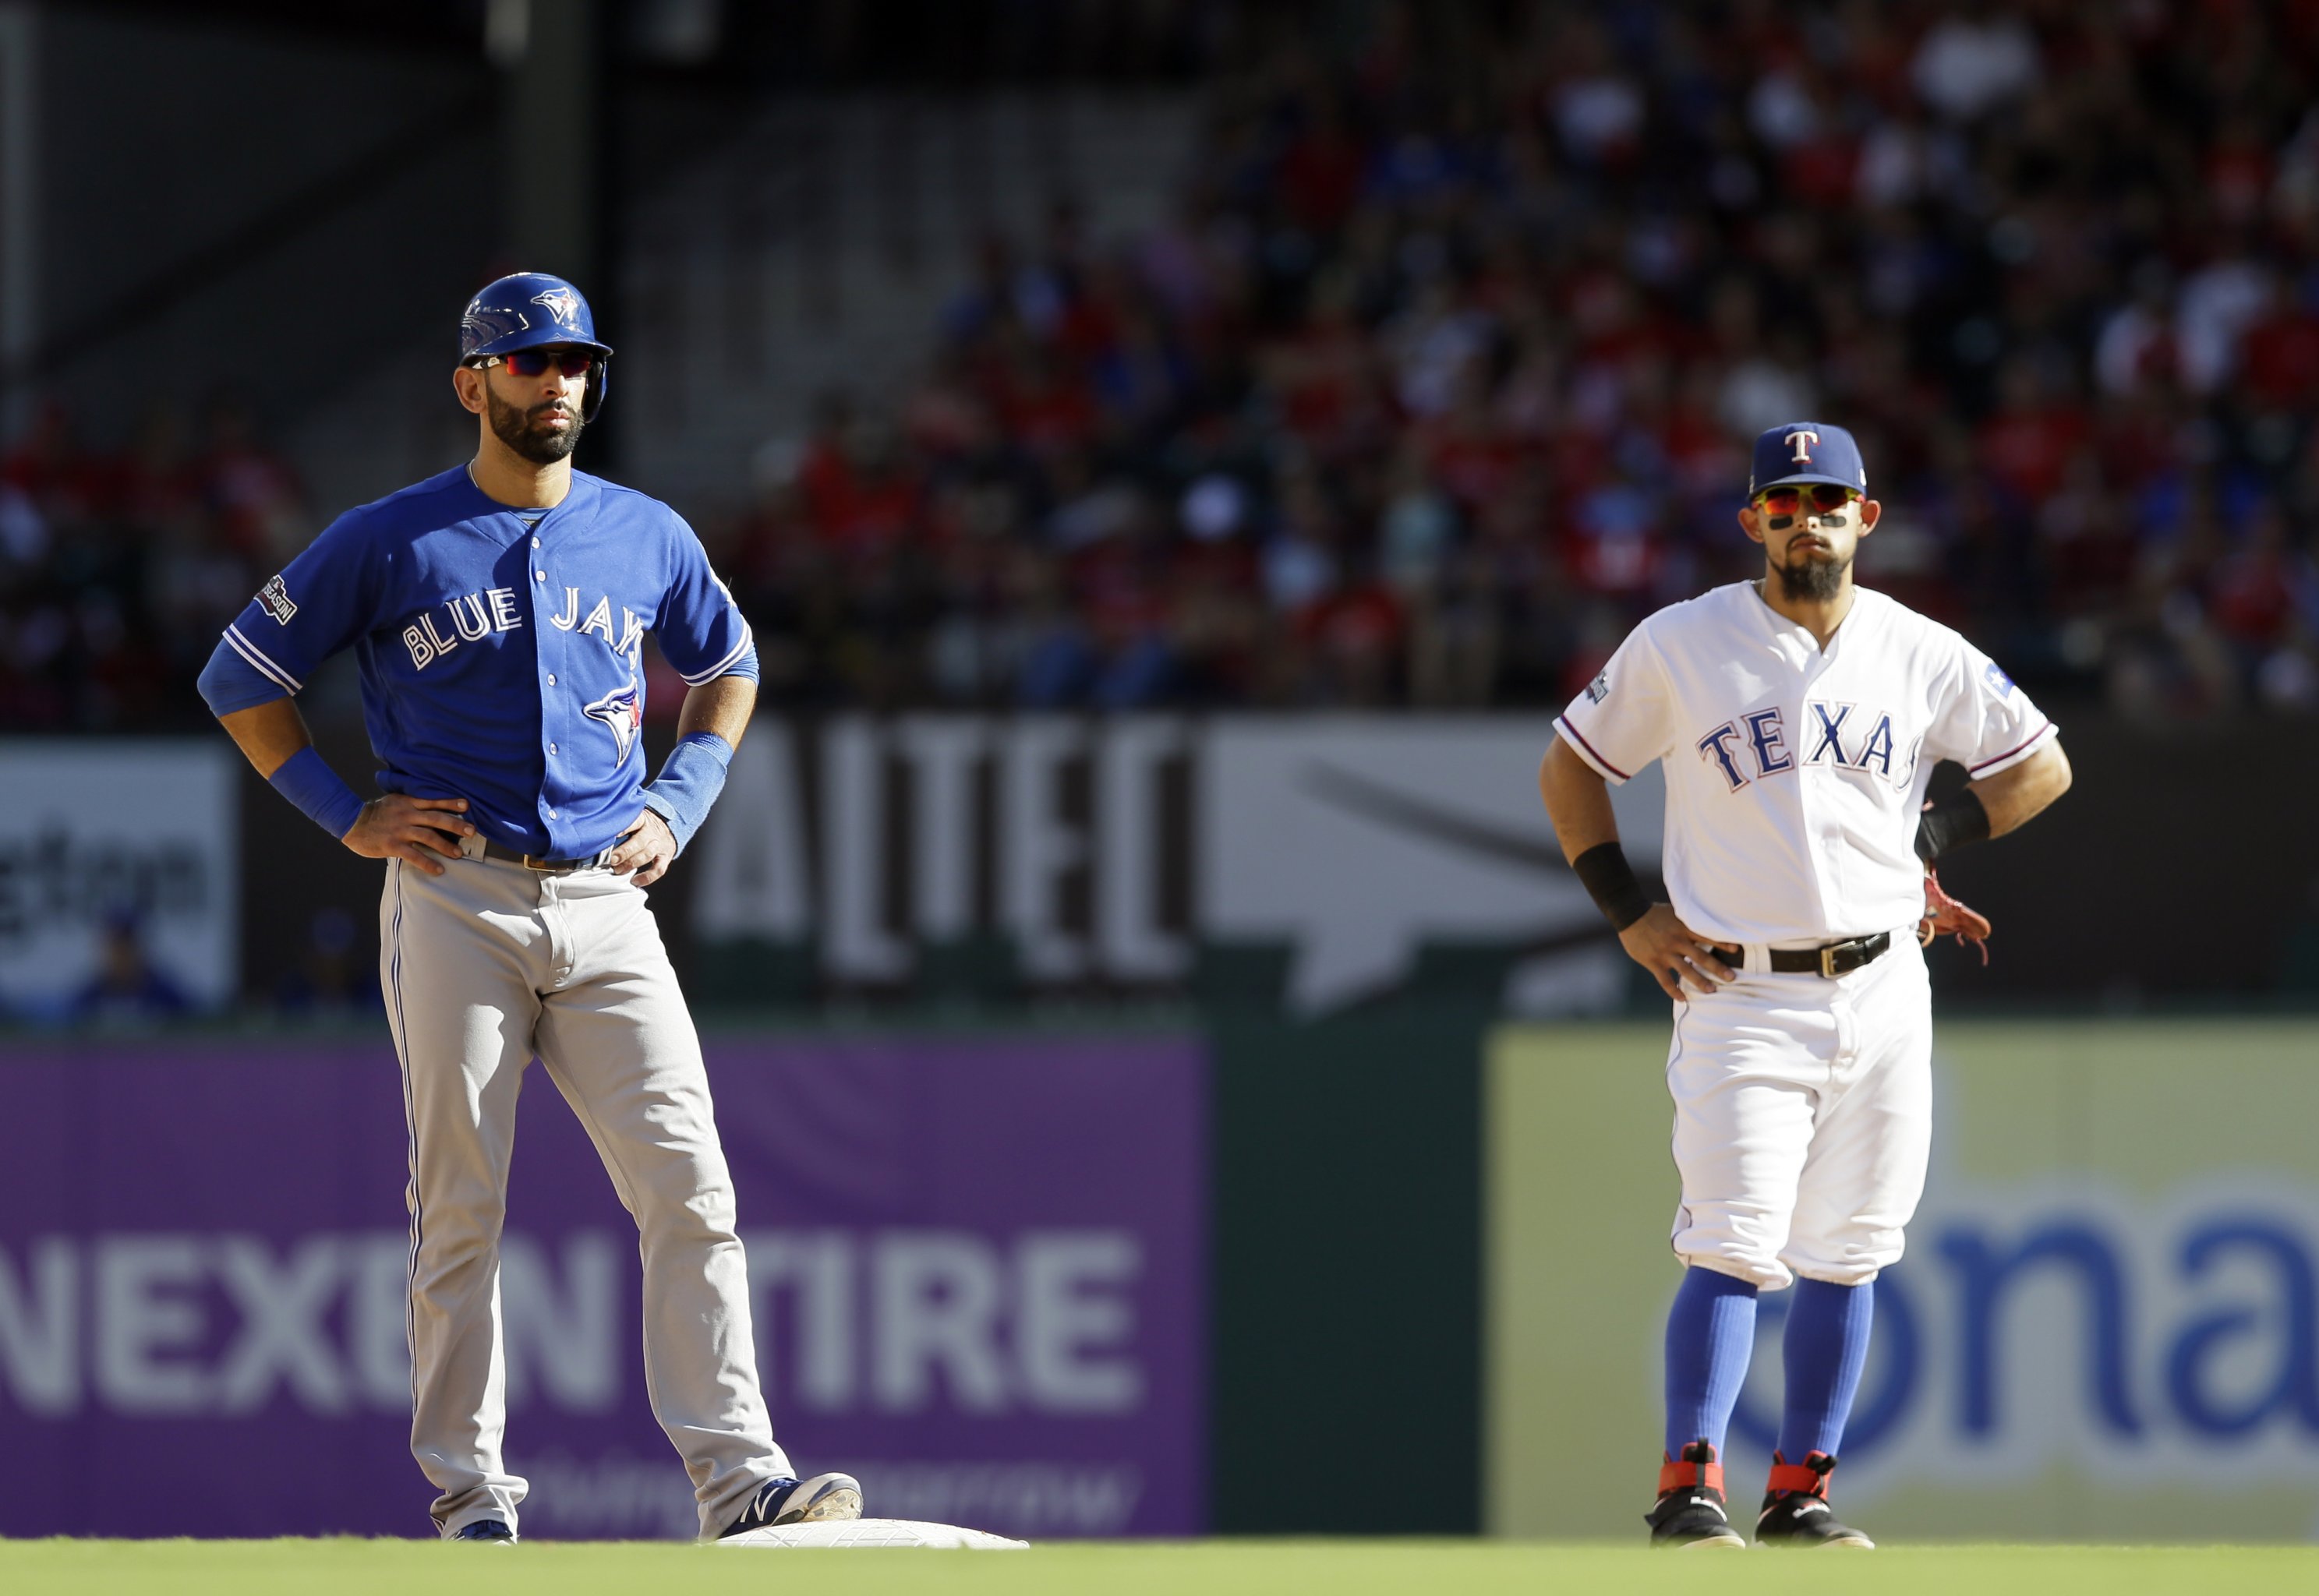 MLB trade rumors and news: Yankees acquire Rougned Odor, Braves